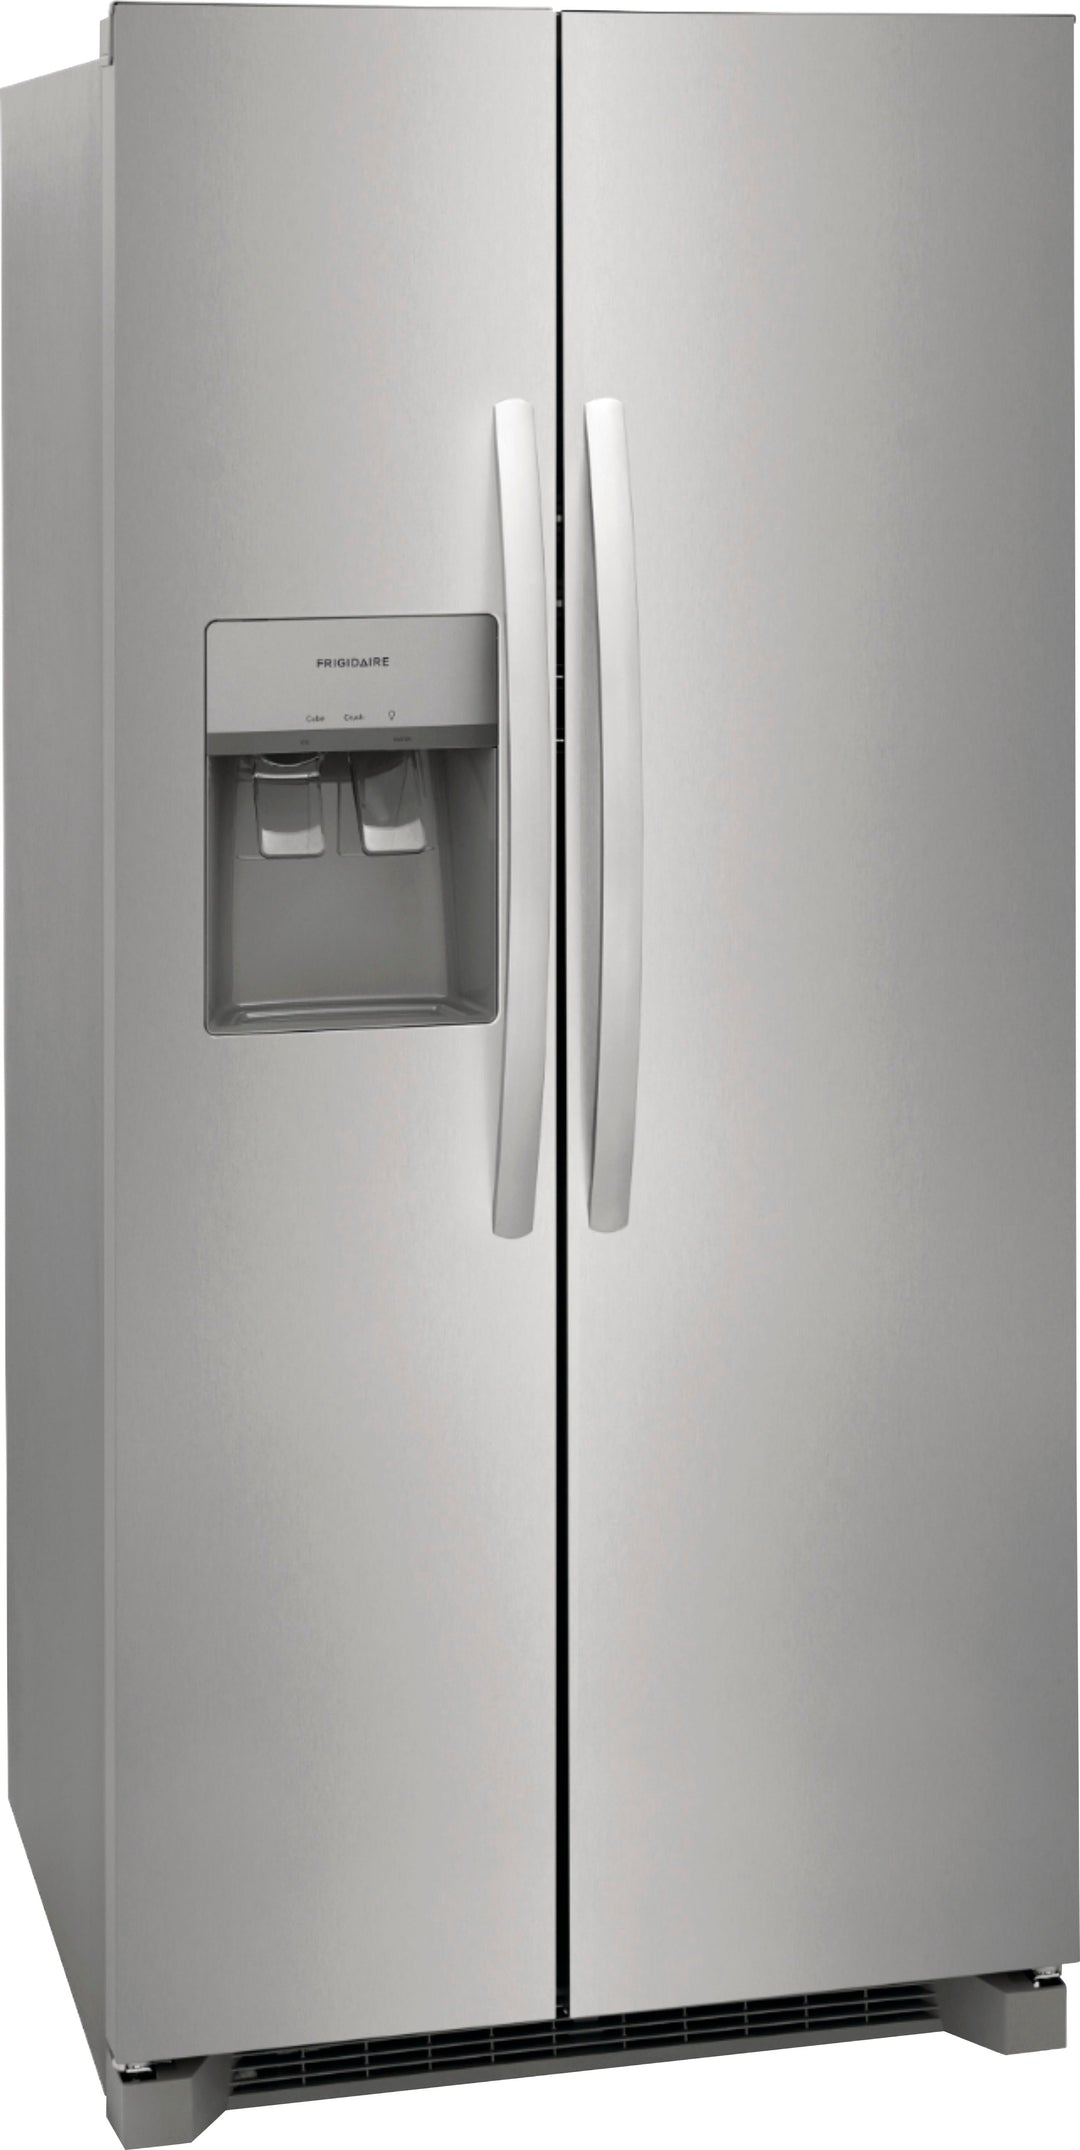 Frigidaire - 22.3 Cu. Ft. Side-by-Side Refrigerator - Stainless steel_1